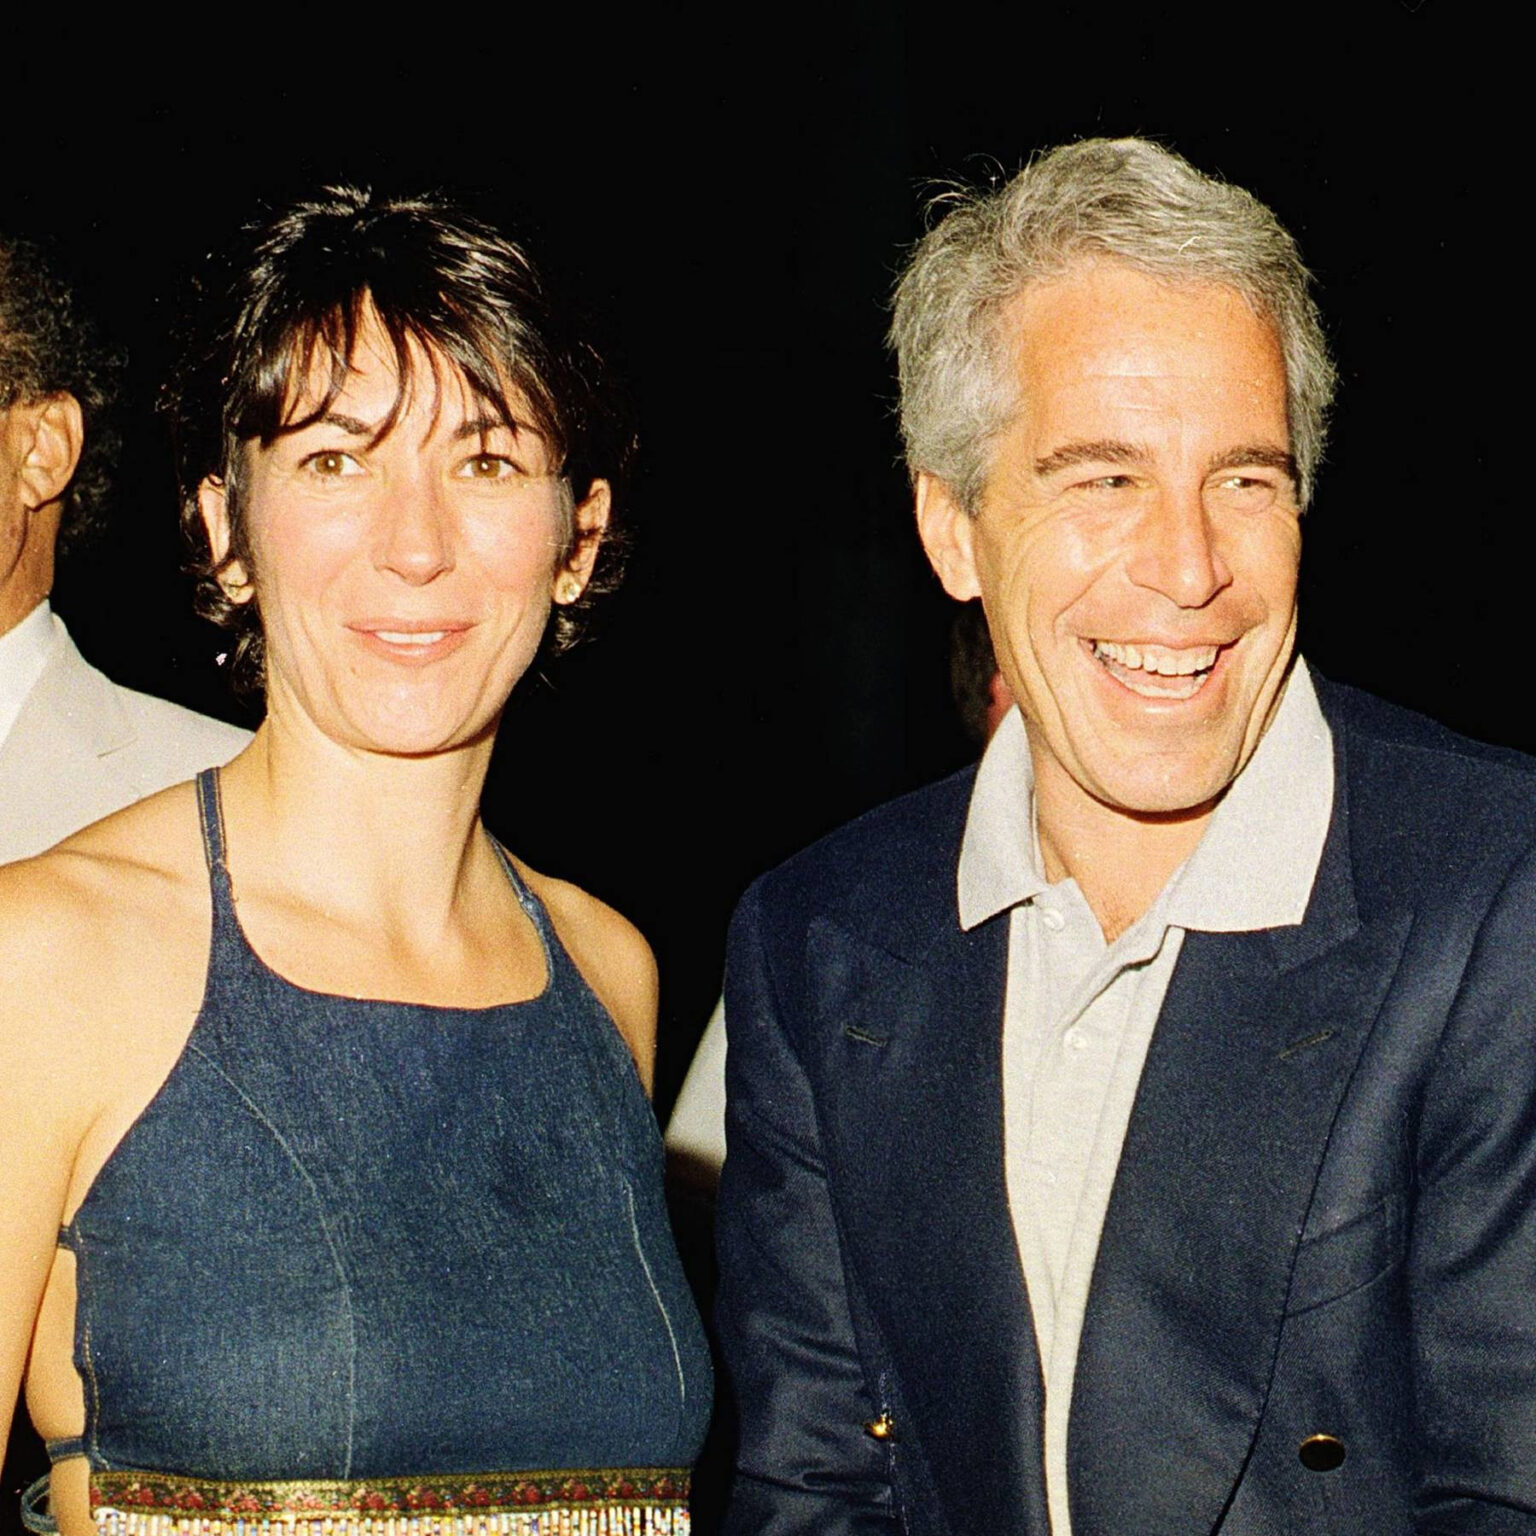 New victims emerged in the Jeffrey Epstein case, some as young as eleven. Learn how the scope of Epstein's crimes is wider than previously thought.